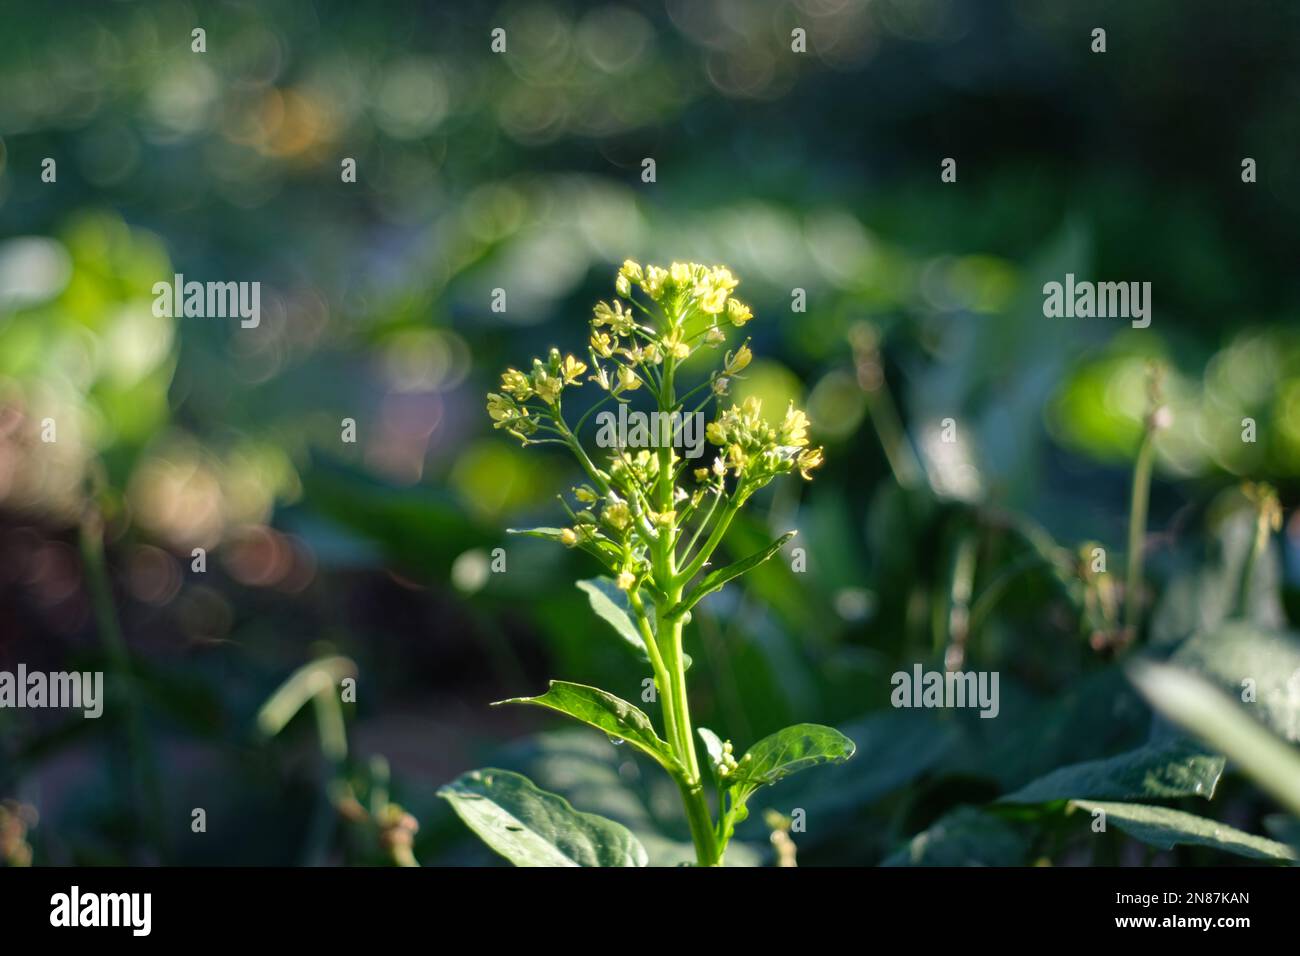 A closeup of a spring camelina (Camelina sativa) in a garden against blurred background Stock Photo